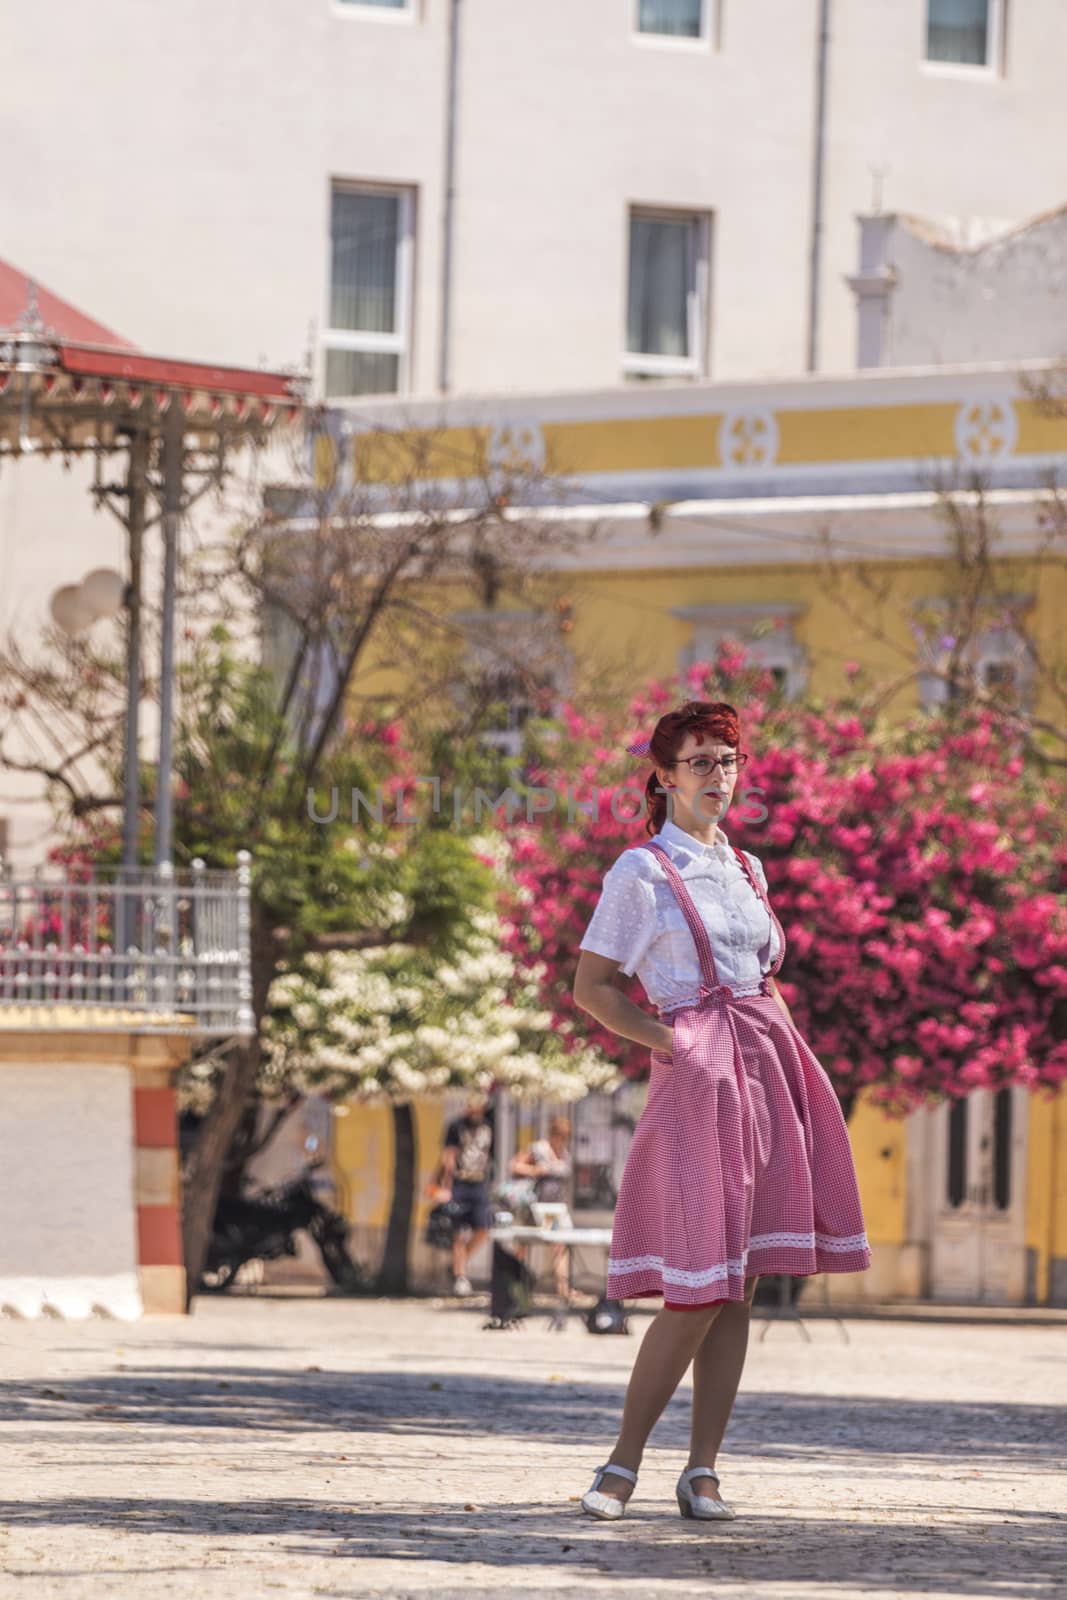 View of pinup young woman in vintage style clothing on the streets of Faro city.